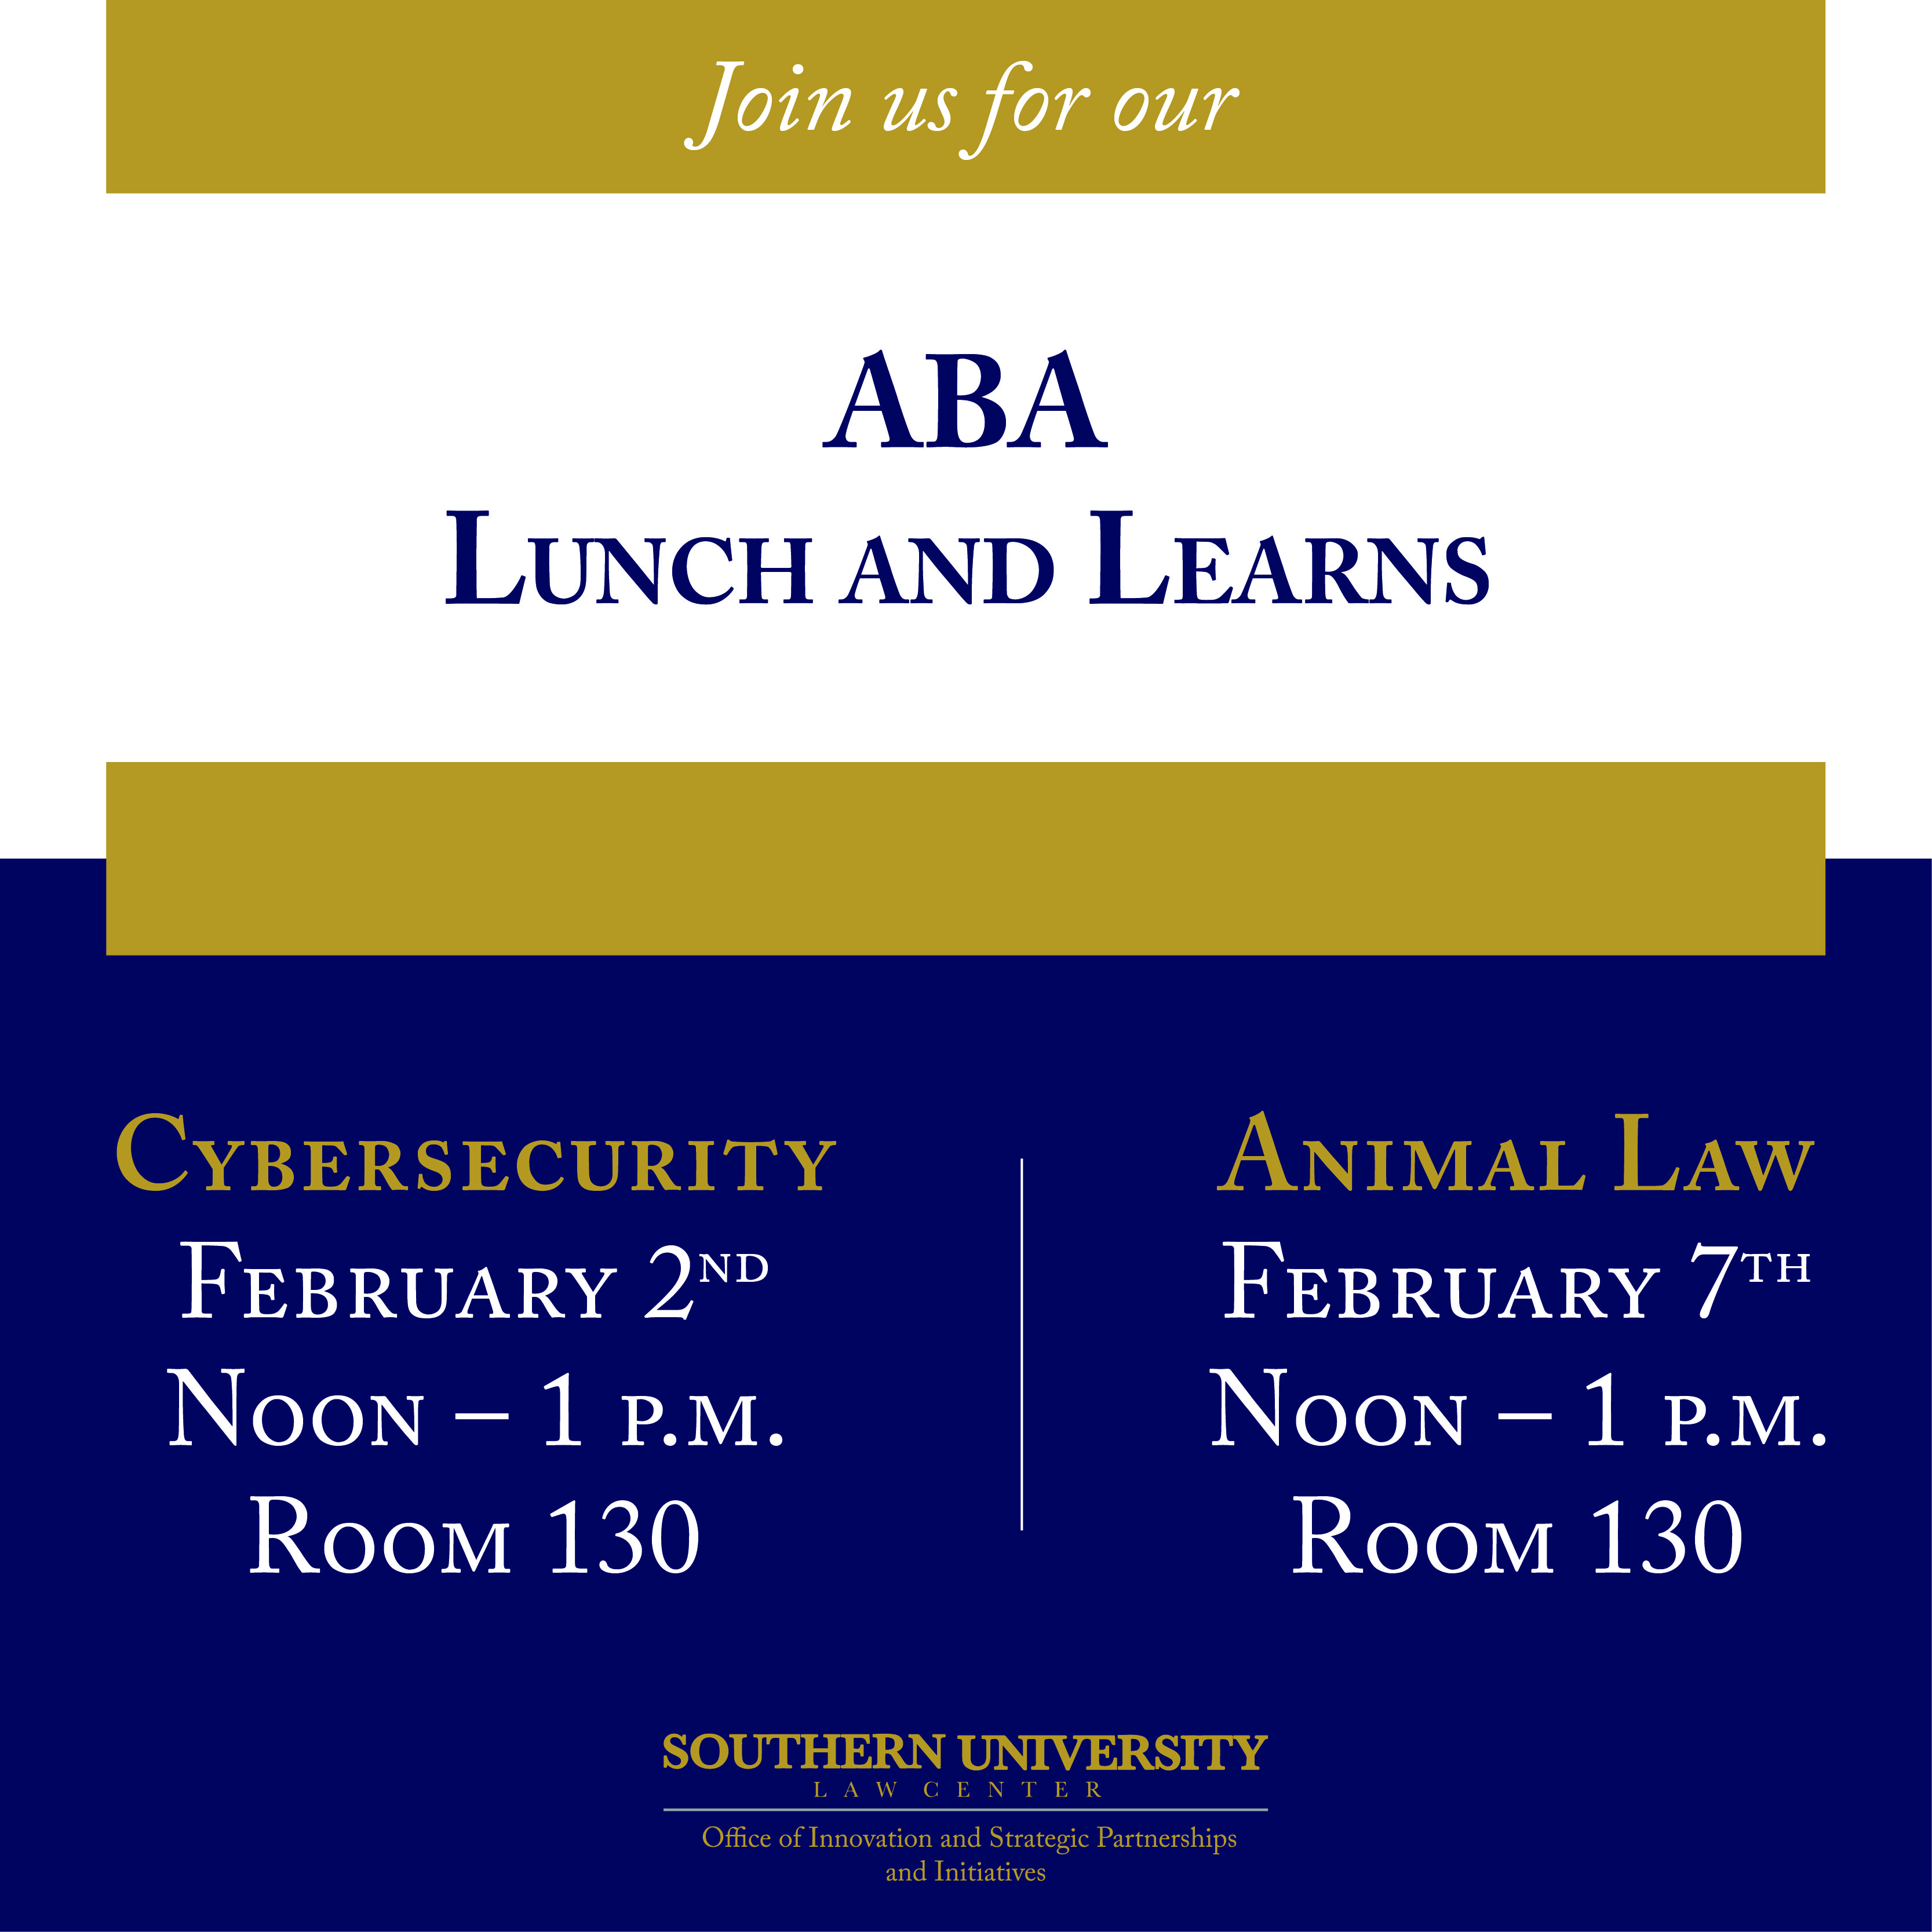 ABA Lunch & Learn - Animal Law - Southern University Law Center